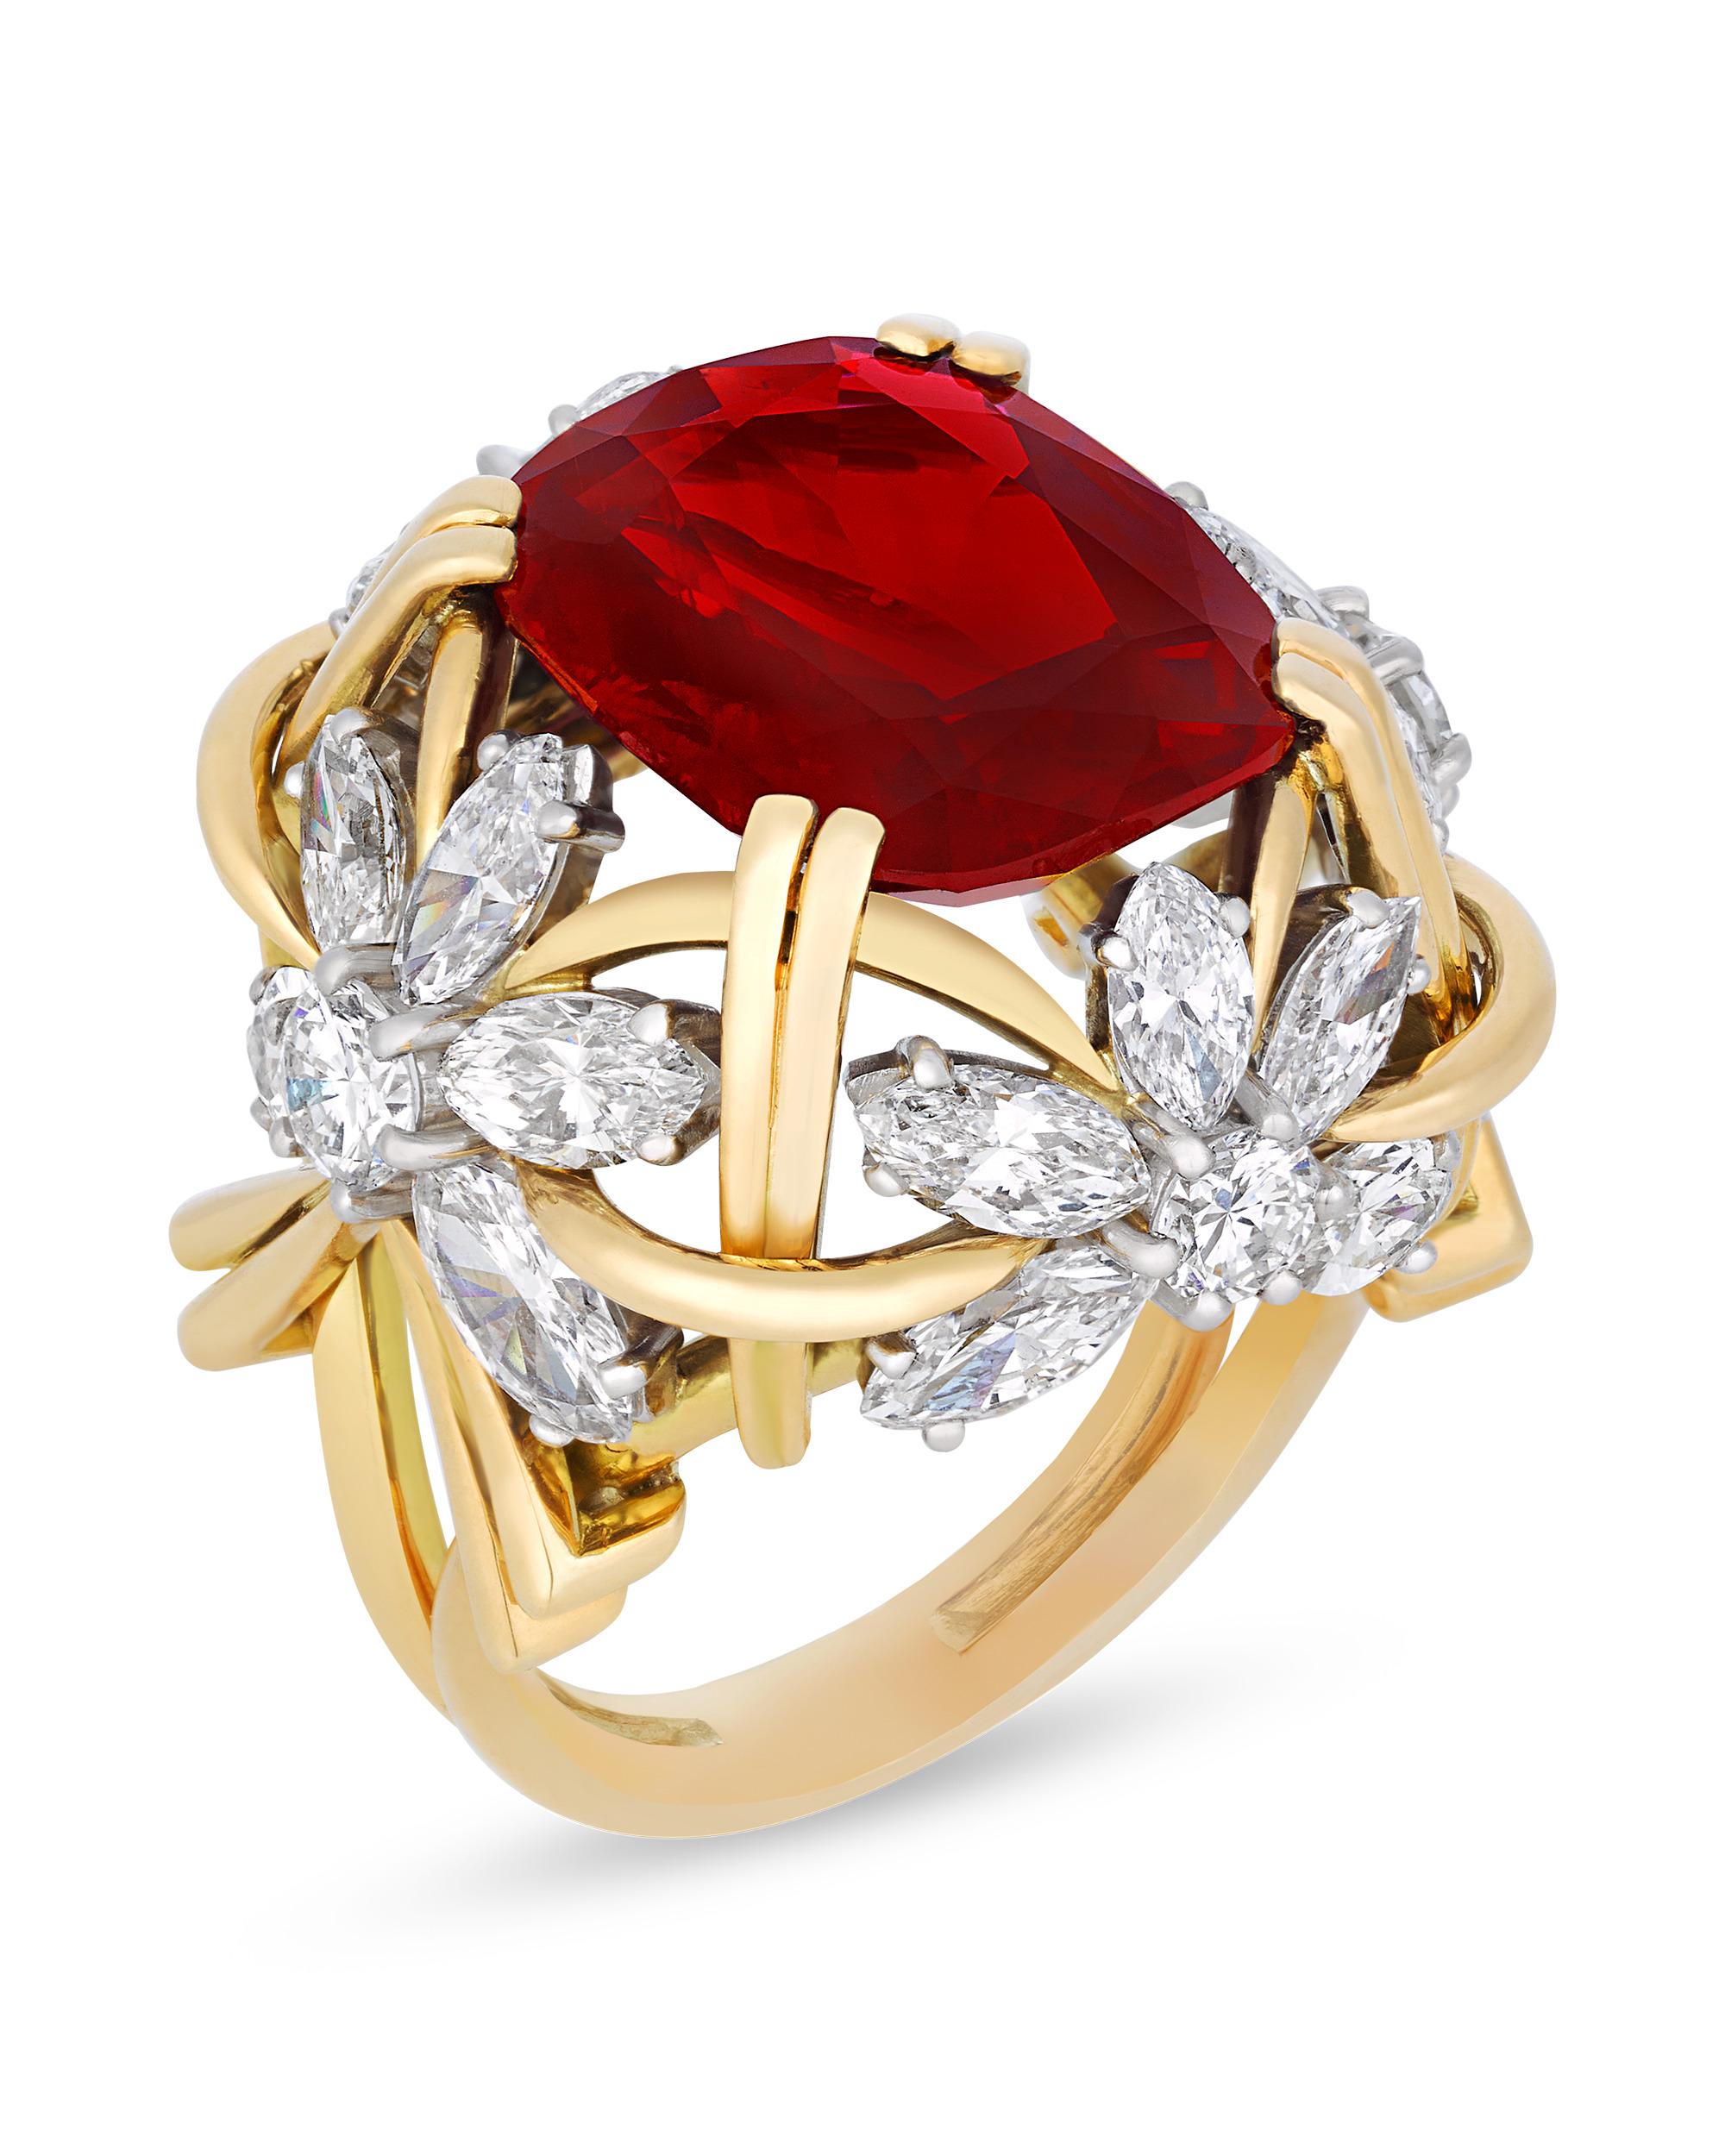 A magnificent, vibrantly-colored Thai ruby weighing 11.71 carats stars in this ring by the legendary jewelry designer Jean Schlumberger. This ruby is certified by the American Gemological Laboratories (AGL) to be of Thai origin. Though Thailand's